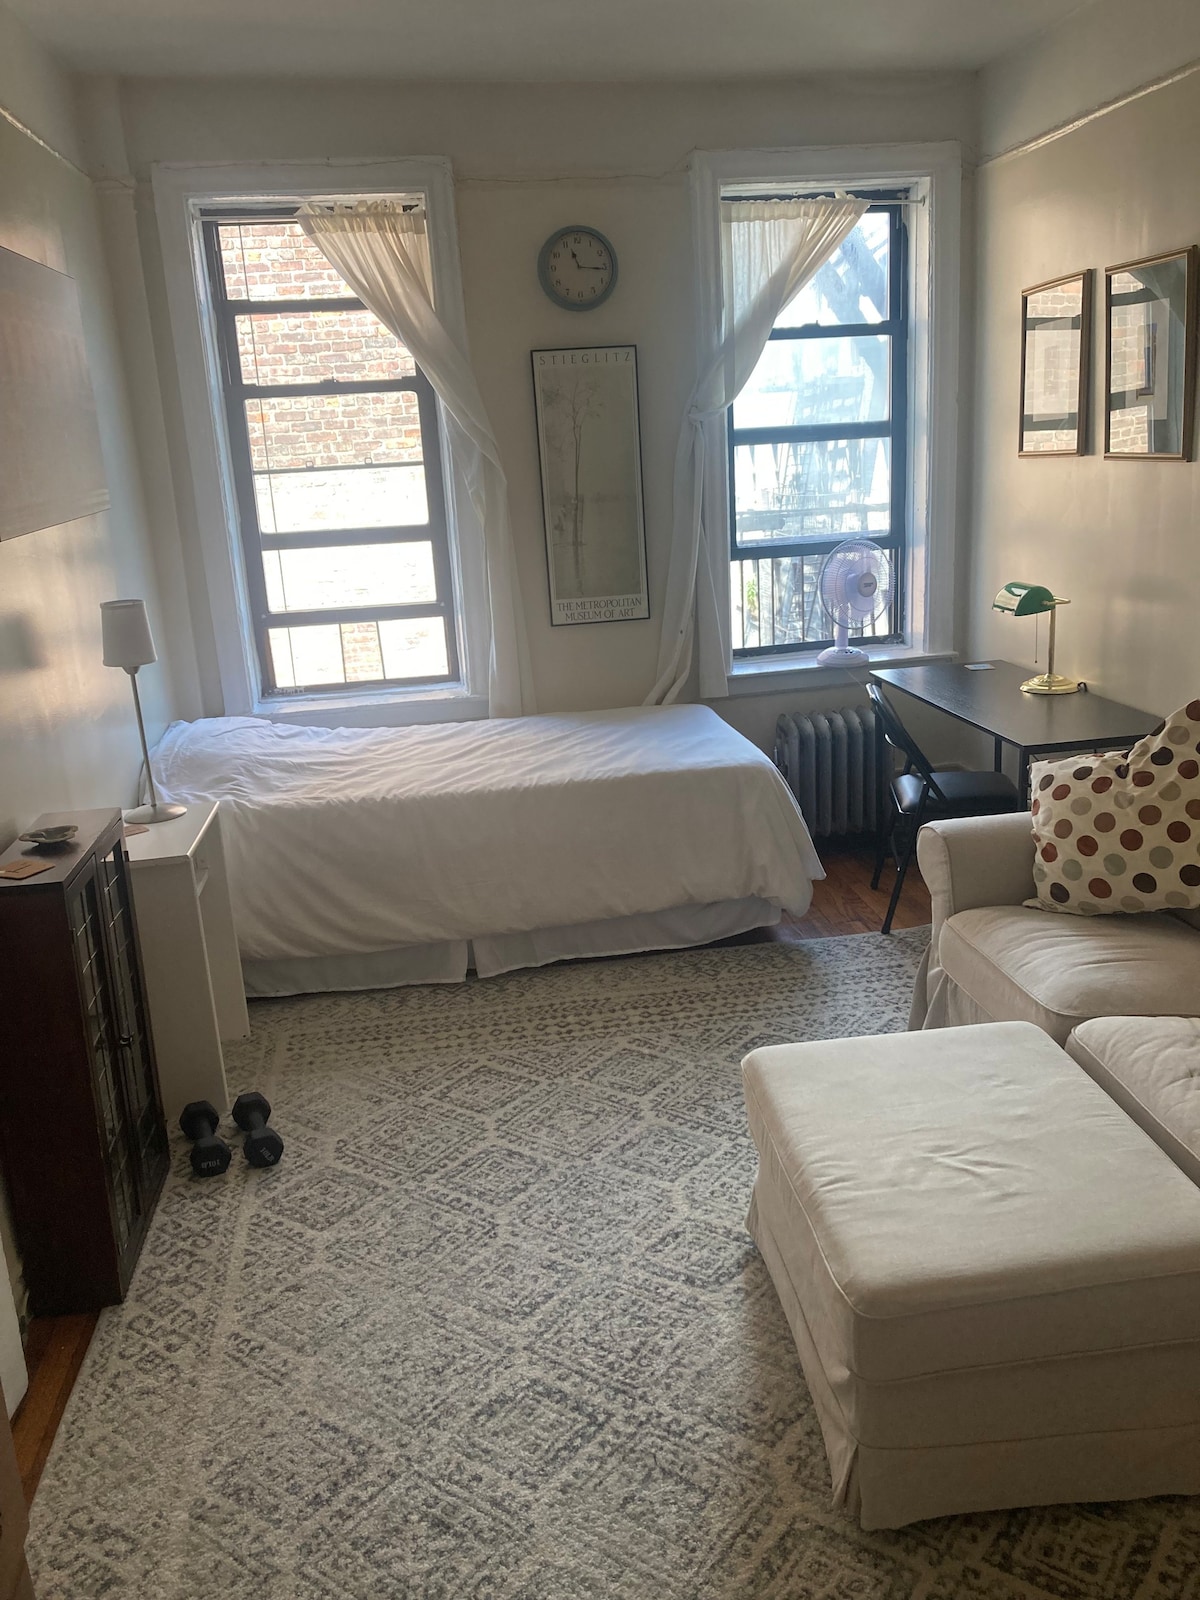 Large Clean Room, close to the A-Train